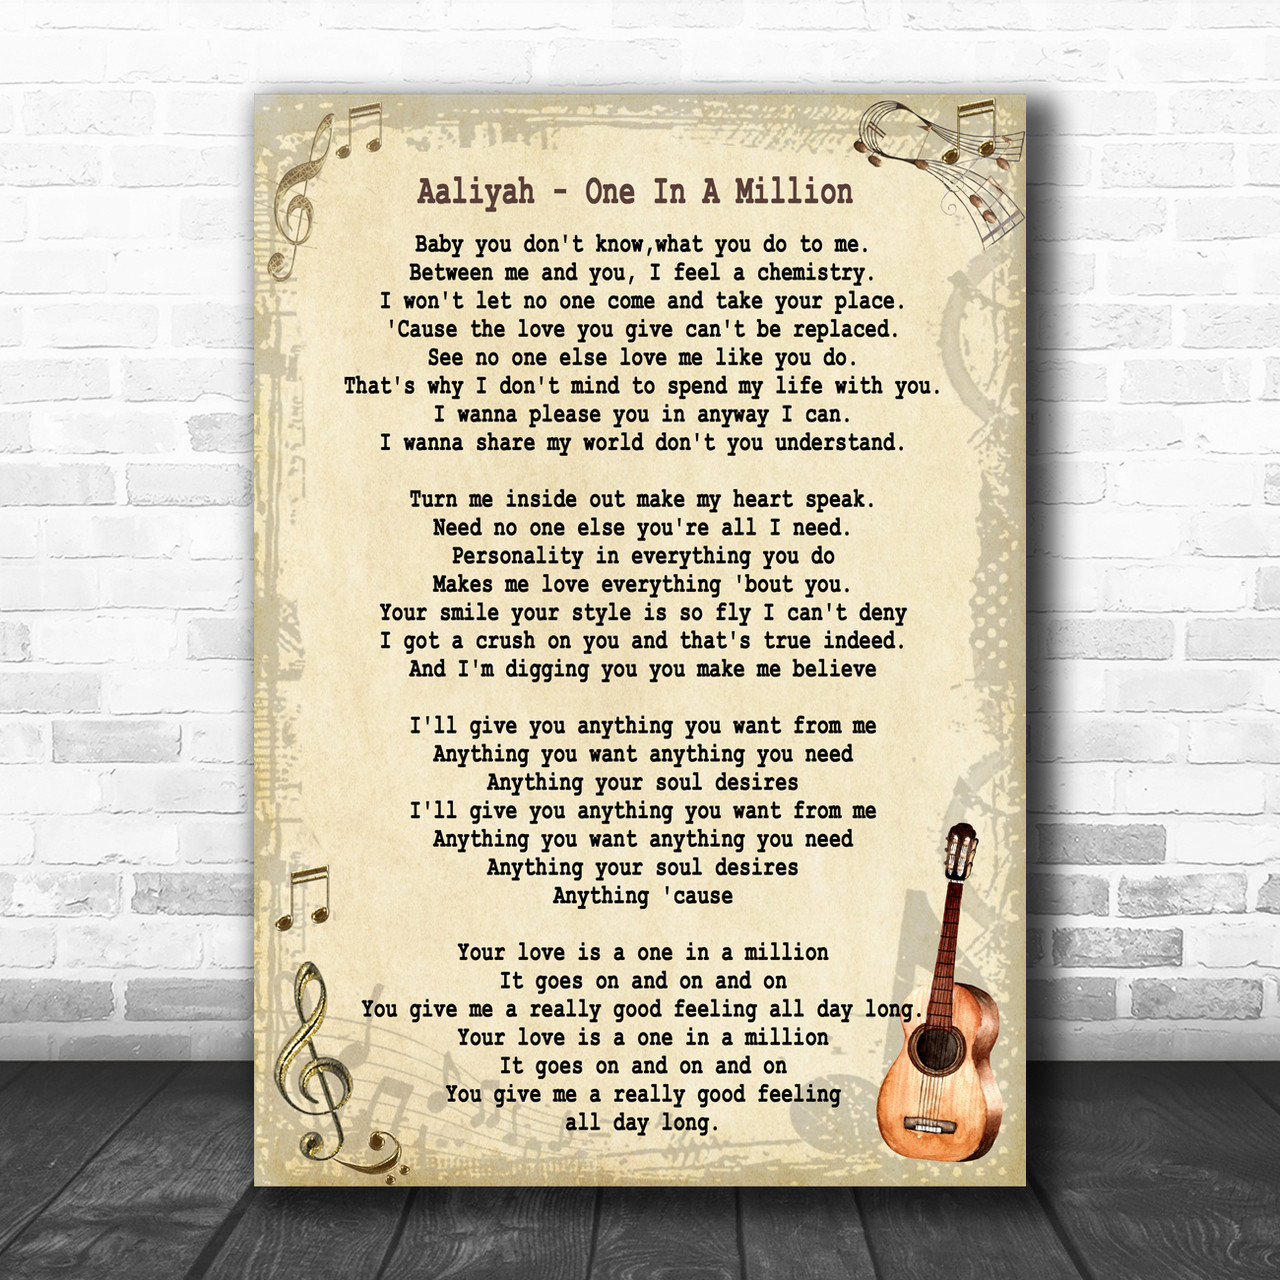 Lyric　Million　Music　Art　Aaliyah　One　Song　Song　In　A　Print　Lyric　Wall　Designs